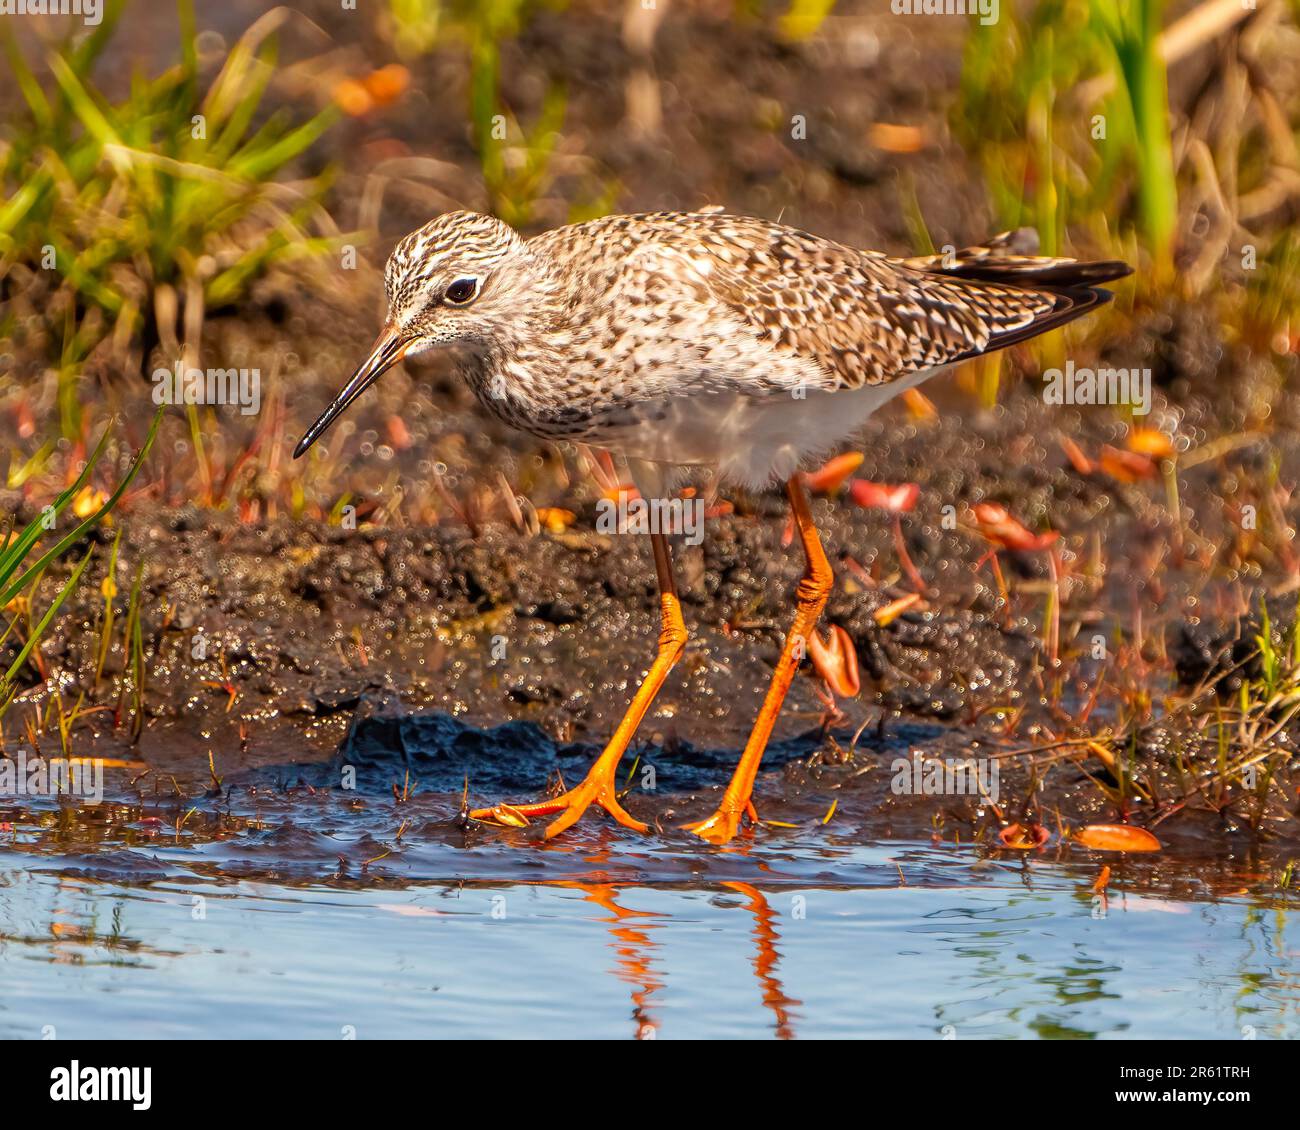 Common Sandpiper foraging for food in a marsh environment and habitat displaying its long bill and orange legs. Sandpiper Picture. Stock Photo